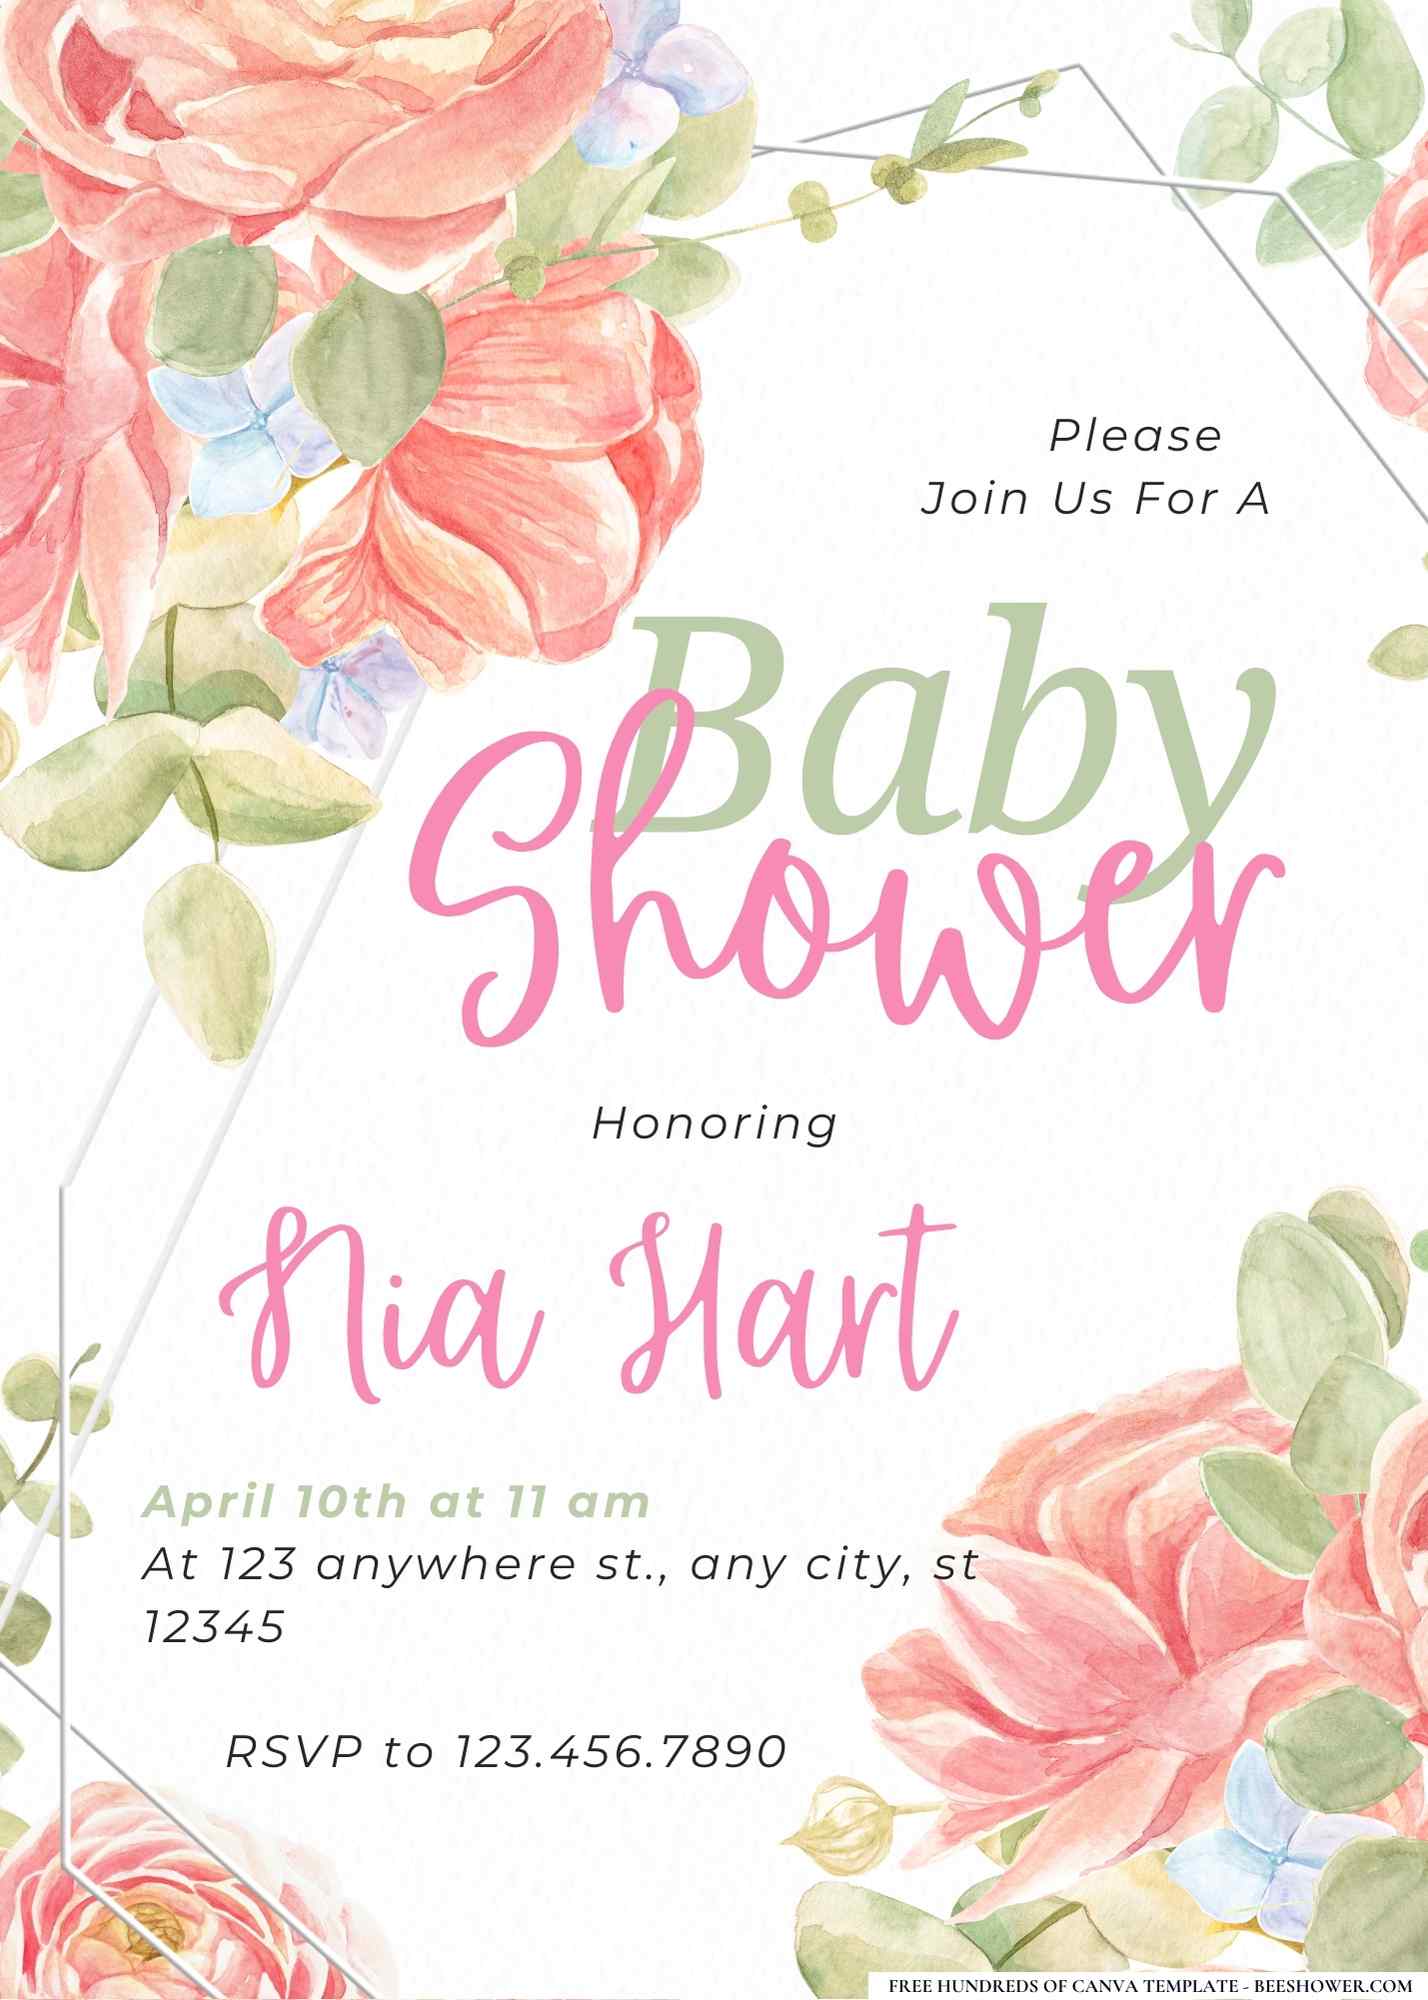 Peachy Keen Blossoms Baby Shower Invitation